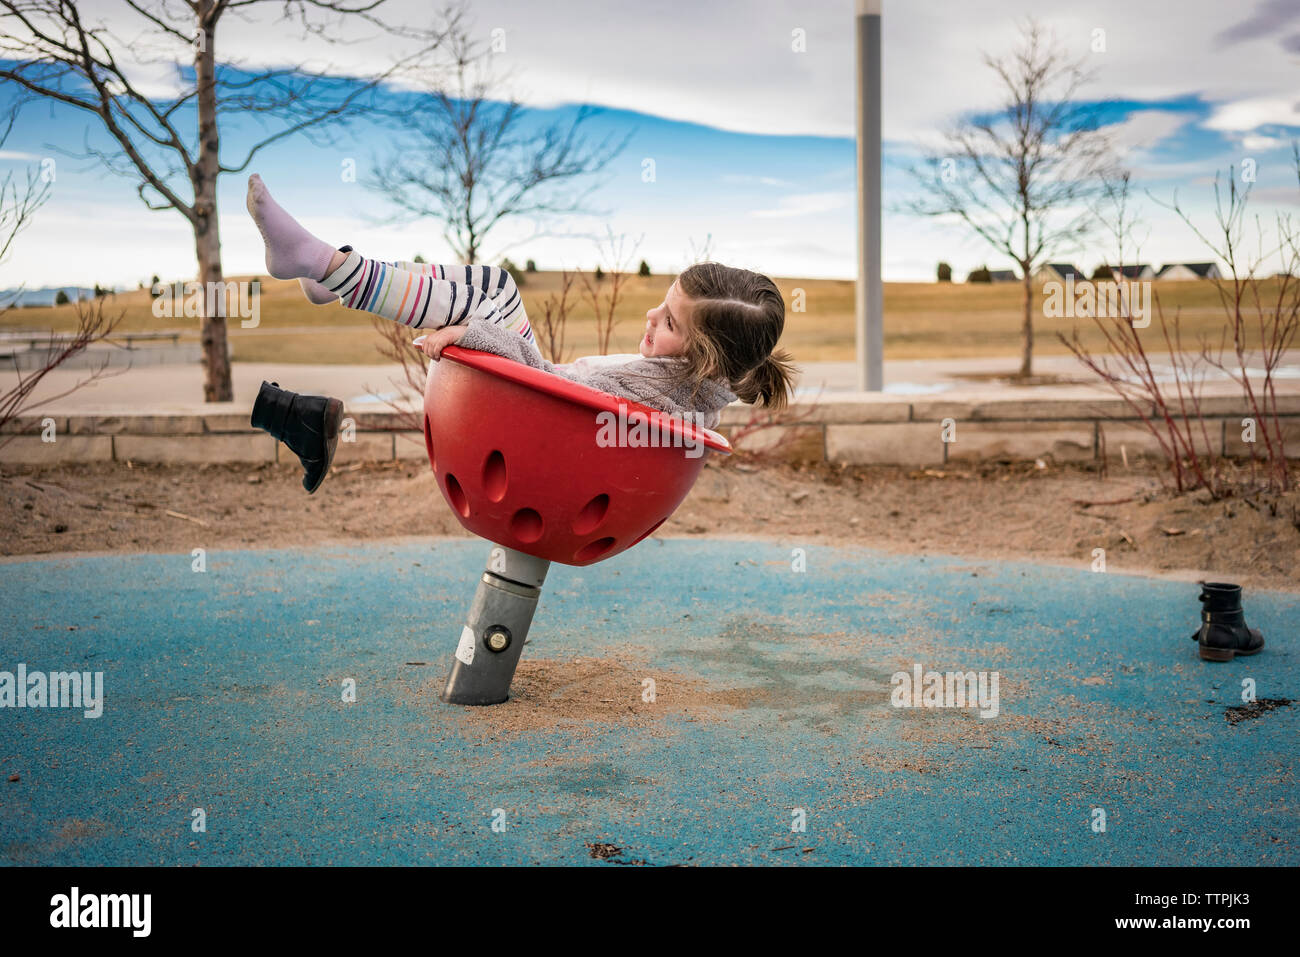 Side view of playful girl throwing shoes while playing on outdoor play equipment against cloudy sky at park Stock Photo